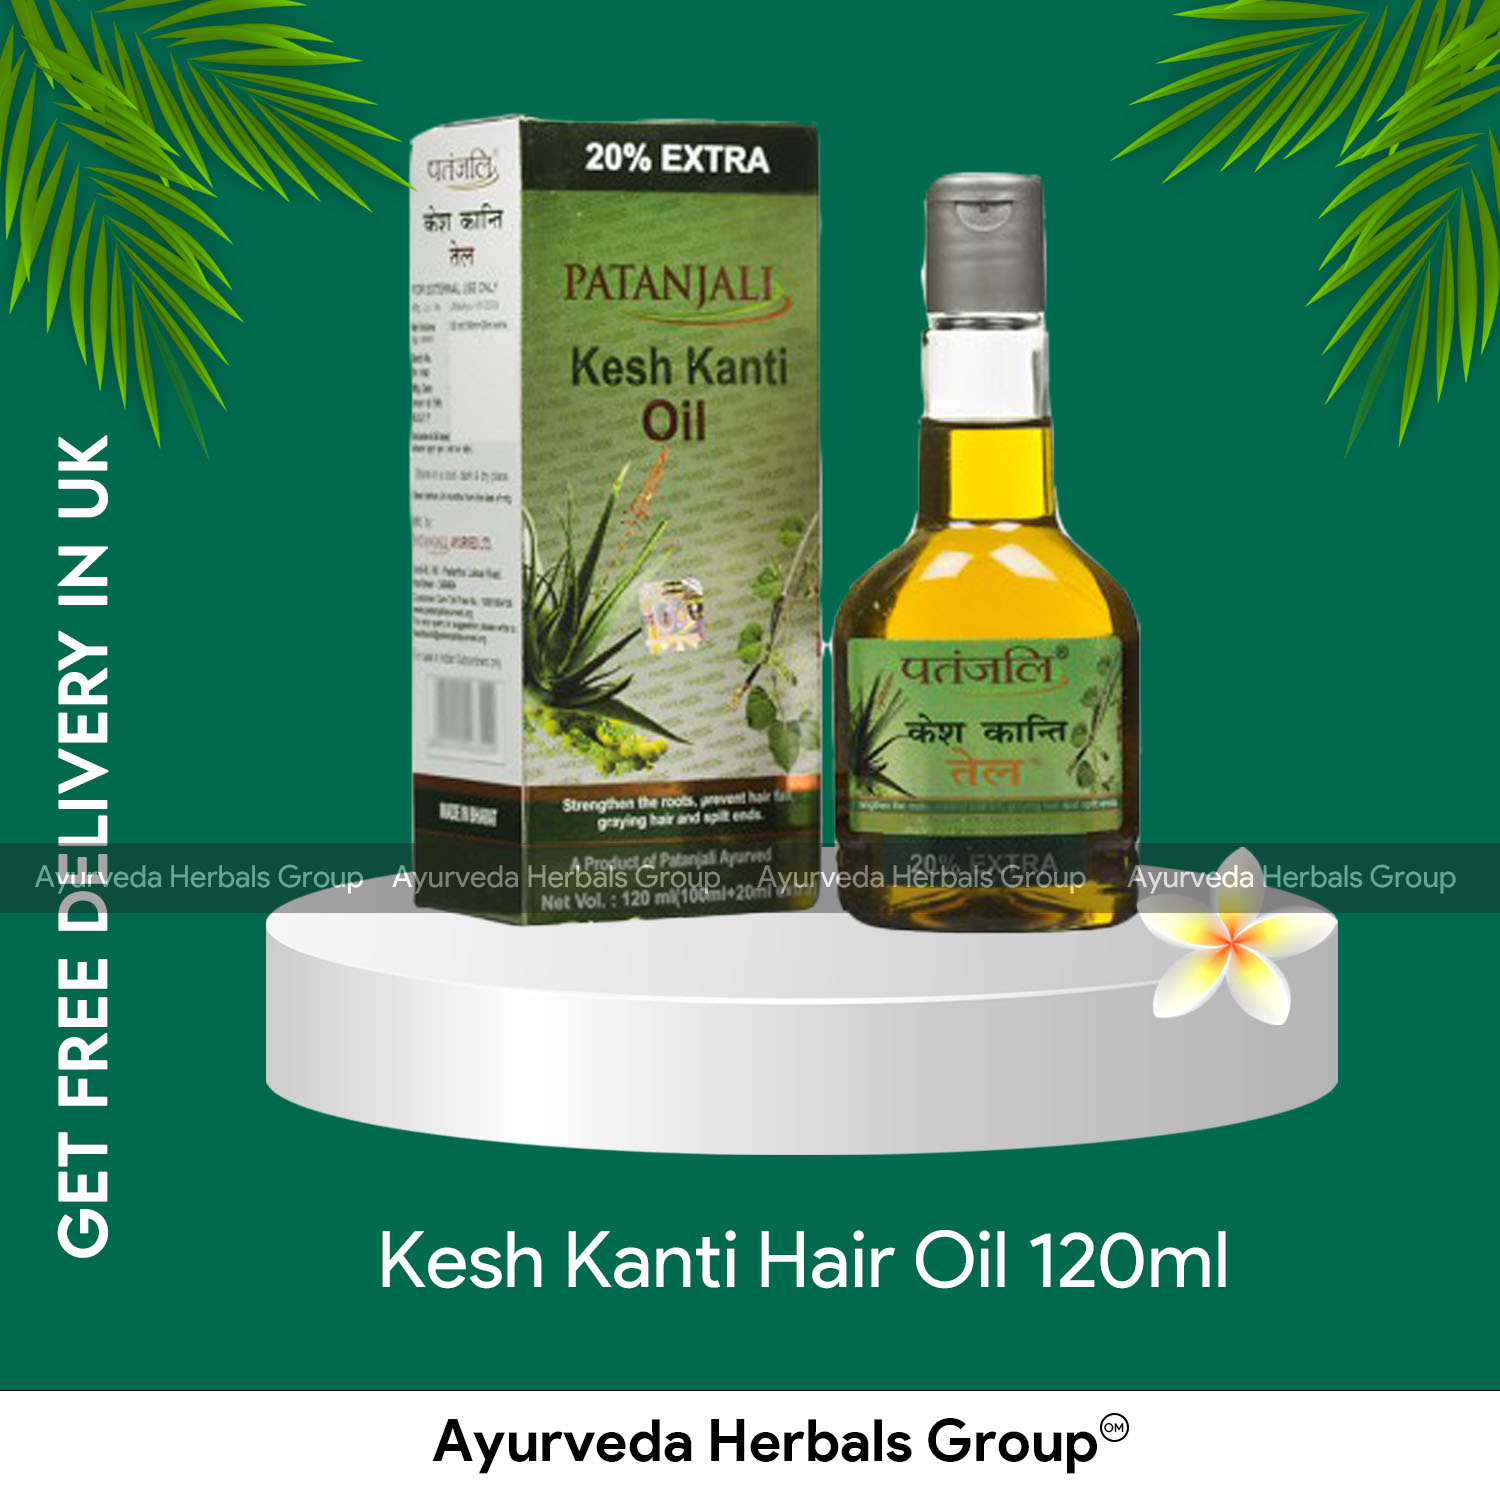 Patanjali Kesh Kanti Hair Oil Review: Is It Really Effective?